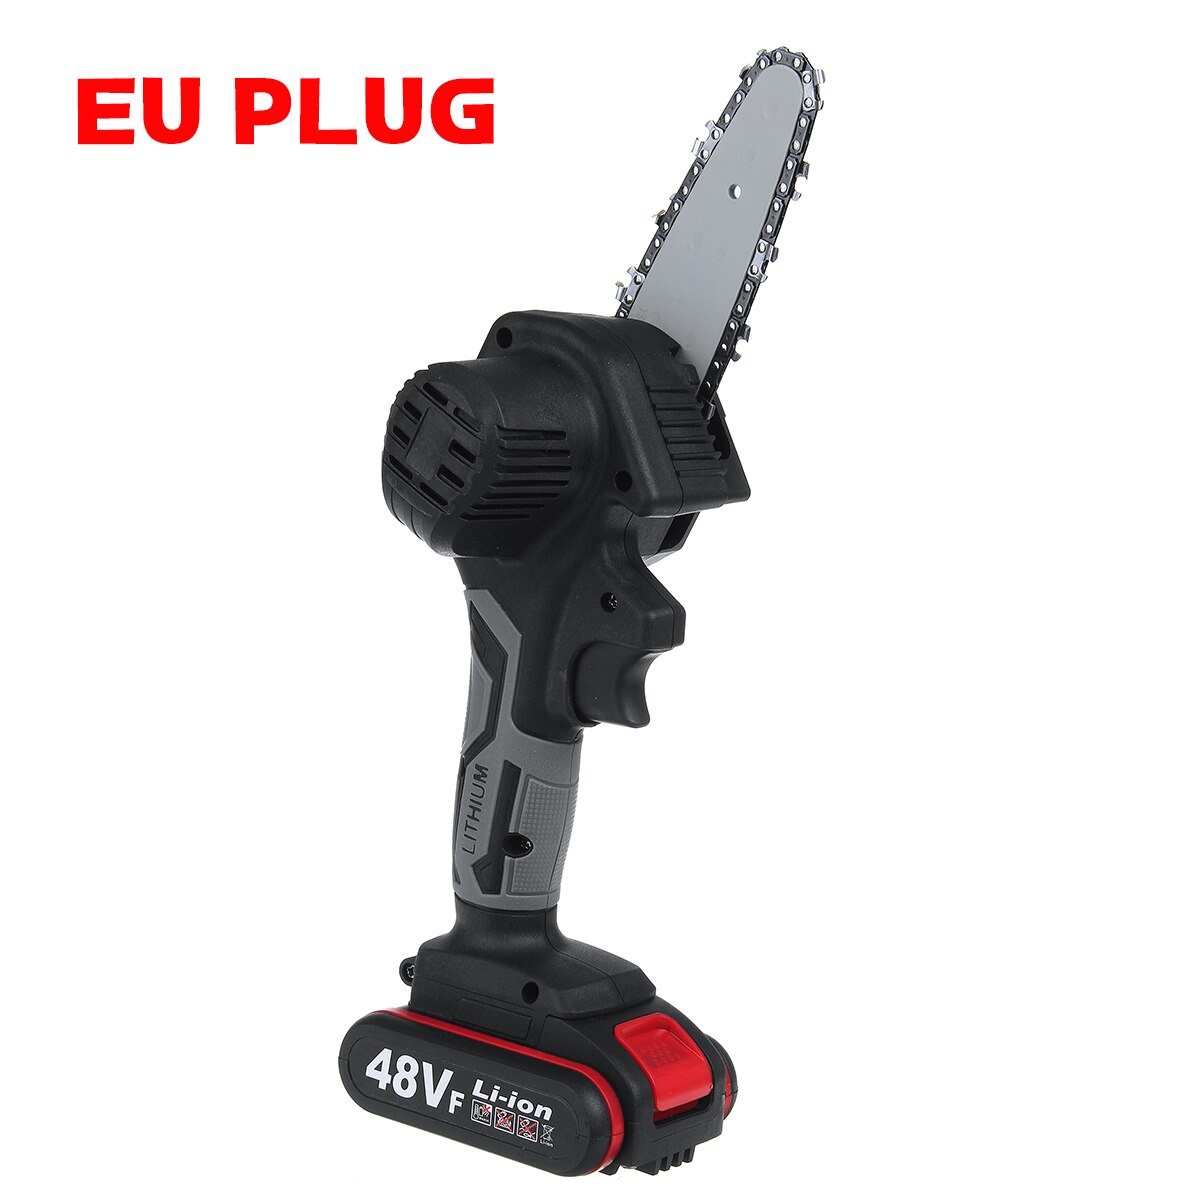 48V Cordless Electric Chain Saw 4inch Portable Electric Saw Woodworking Cutting DIY Tool Electric Pruning Saw With 1 Battery: EU Plug